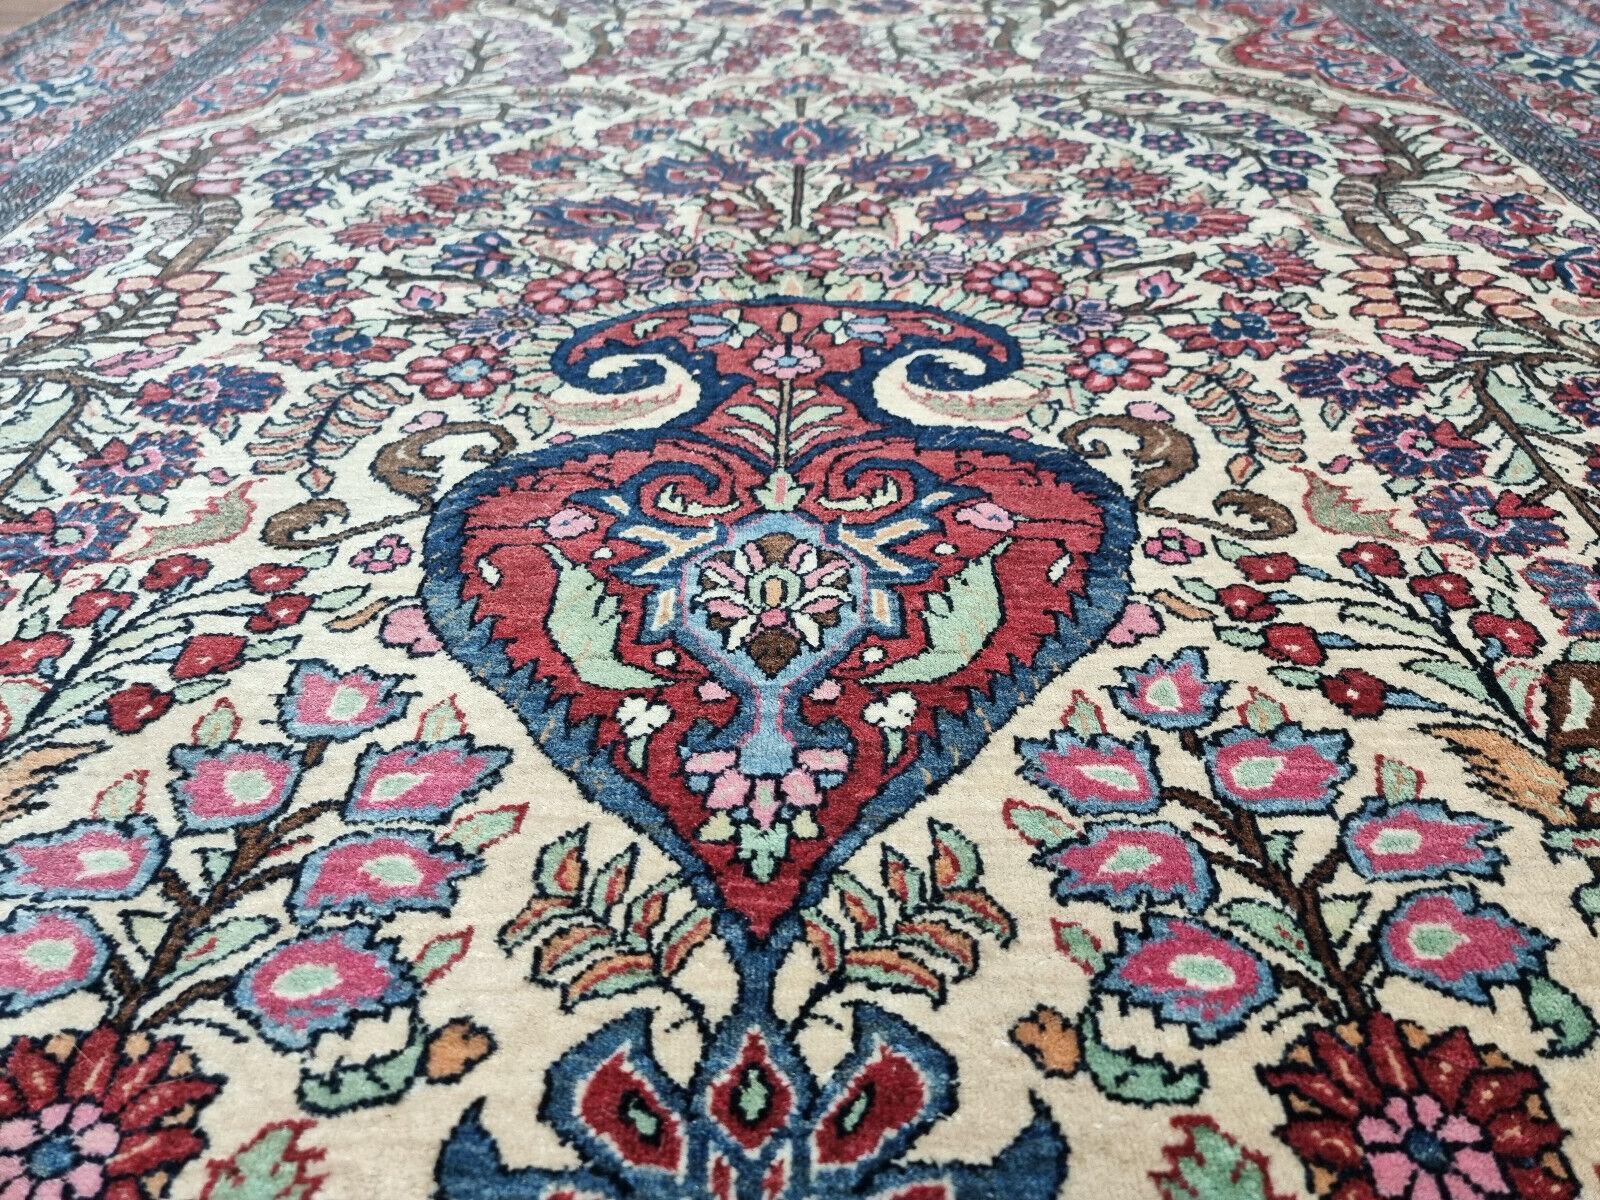 Handmade Antique Persian Style Isfahan Prayer Rug 4.6' x 6.8', 1900s - 1D85 For Sale 3